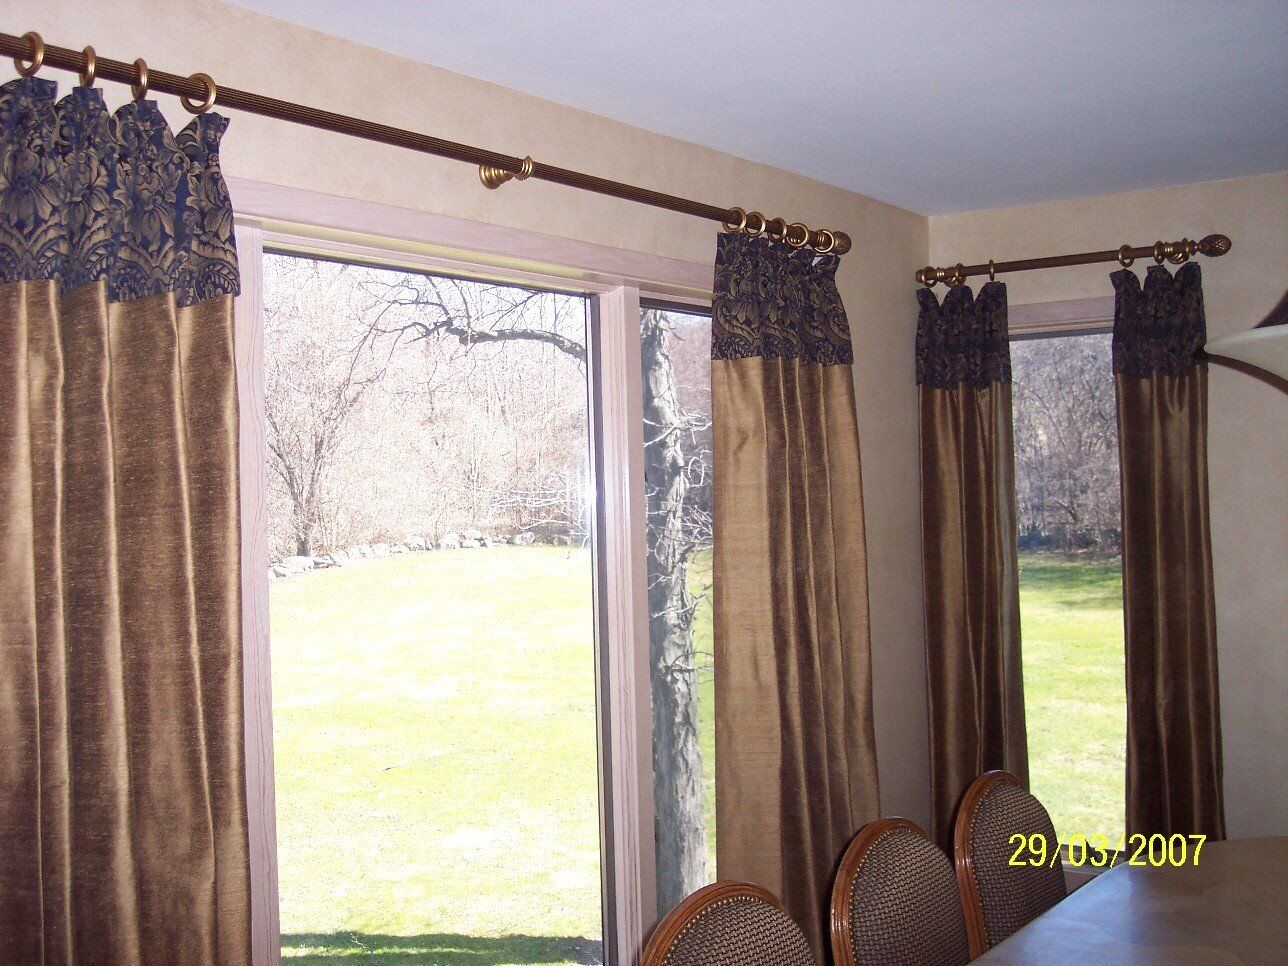 Custom Made Draperies, Curtains, Top Treatments, Valances, Shades, Blinds, Graber, Hunter Douglas, Bed Spreads, Dust Ruffles, Pillows, Cushions, Drapery Rods, Drapery Hardware, Interior Decorating, Interior Design, Remodeling, Syracuse NY, Central NY